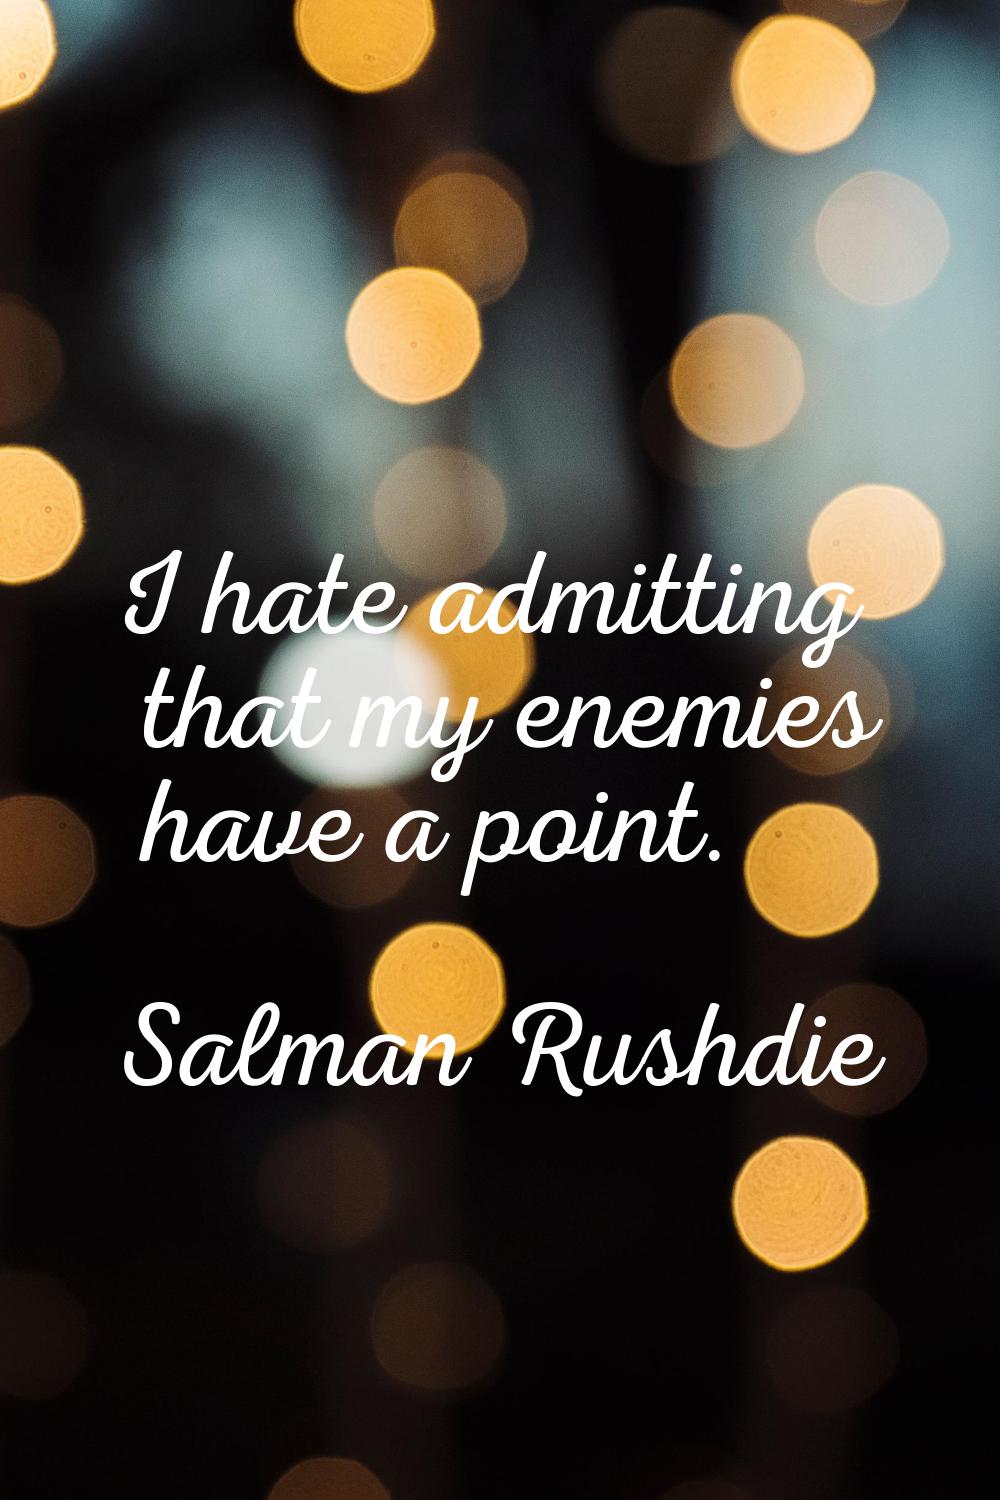 I hate admitting that my enemies have a point.